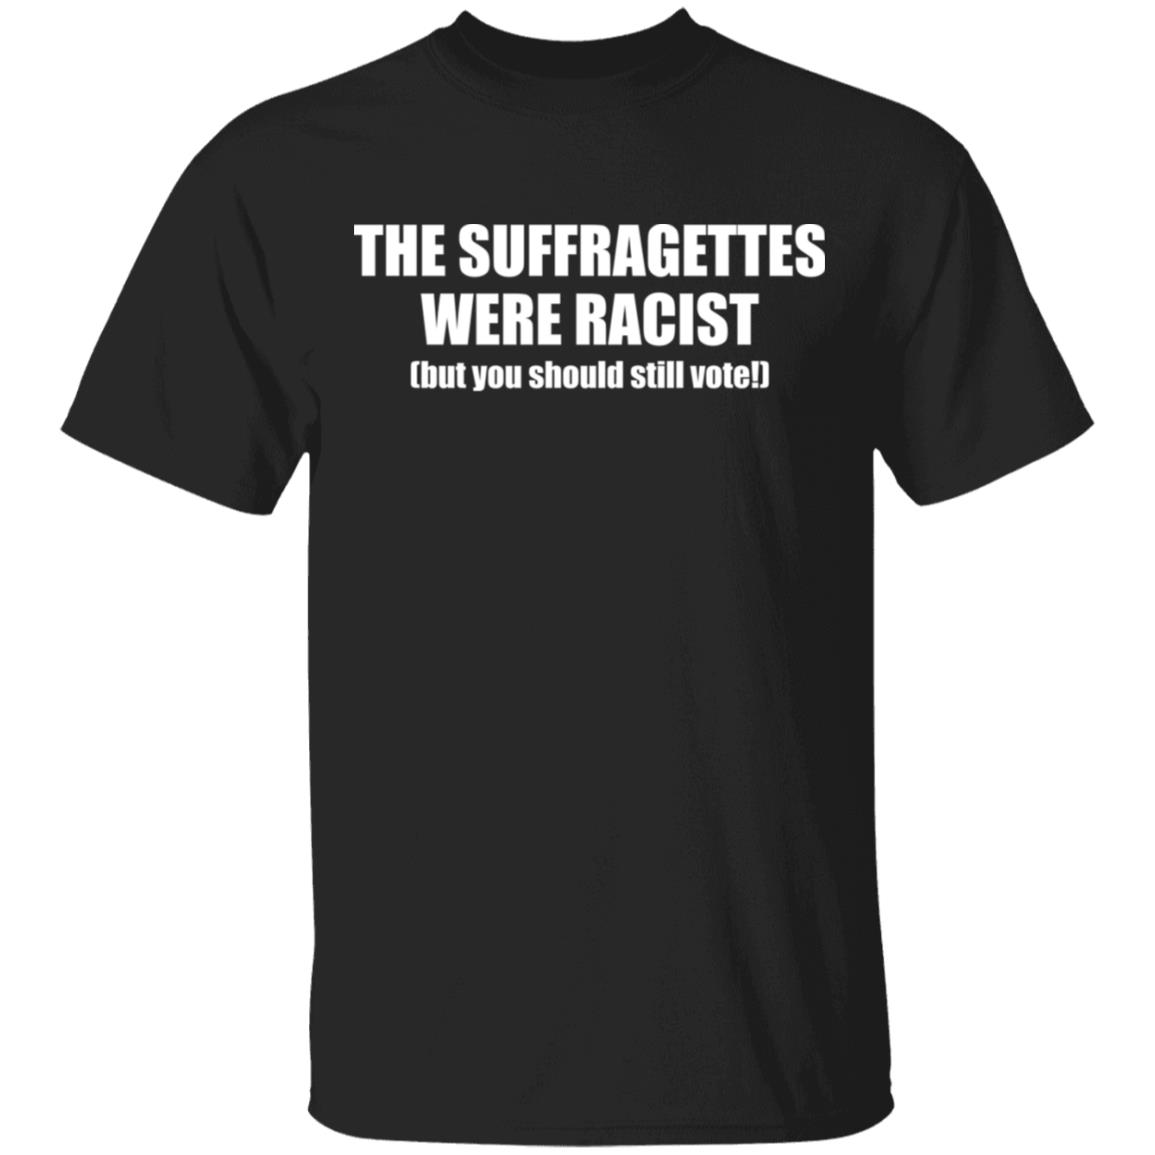 The Suffragettes Were Racist But You Should Still Vote shirt